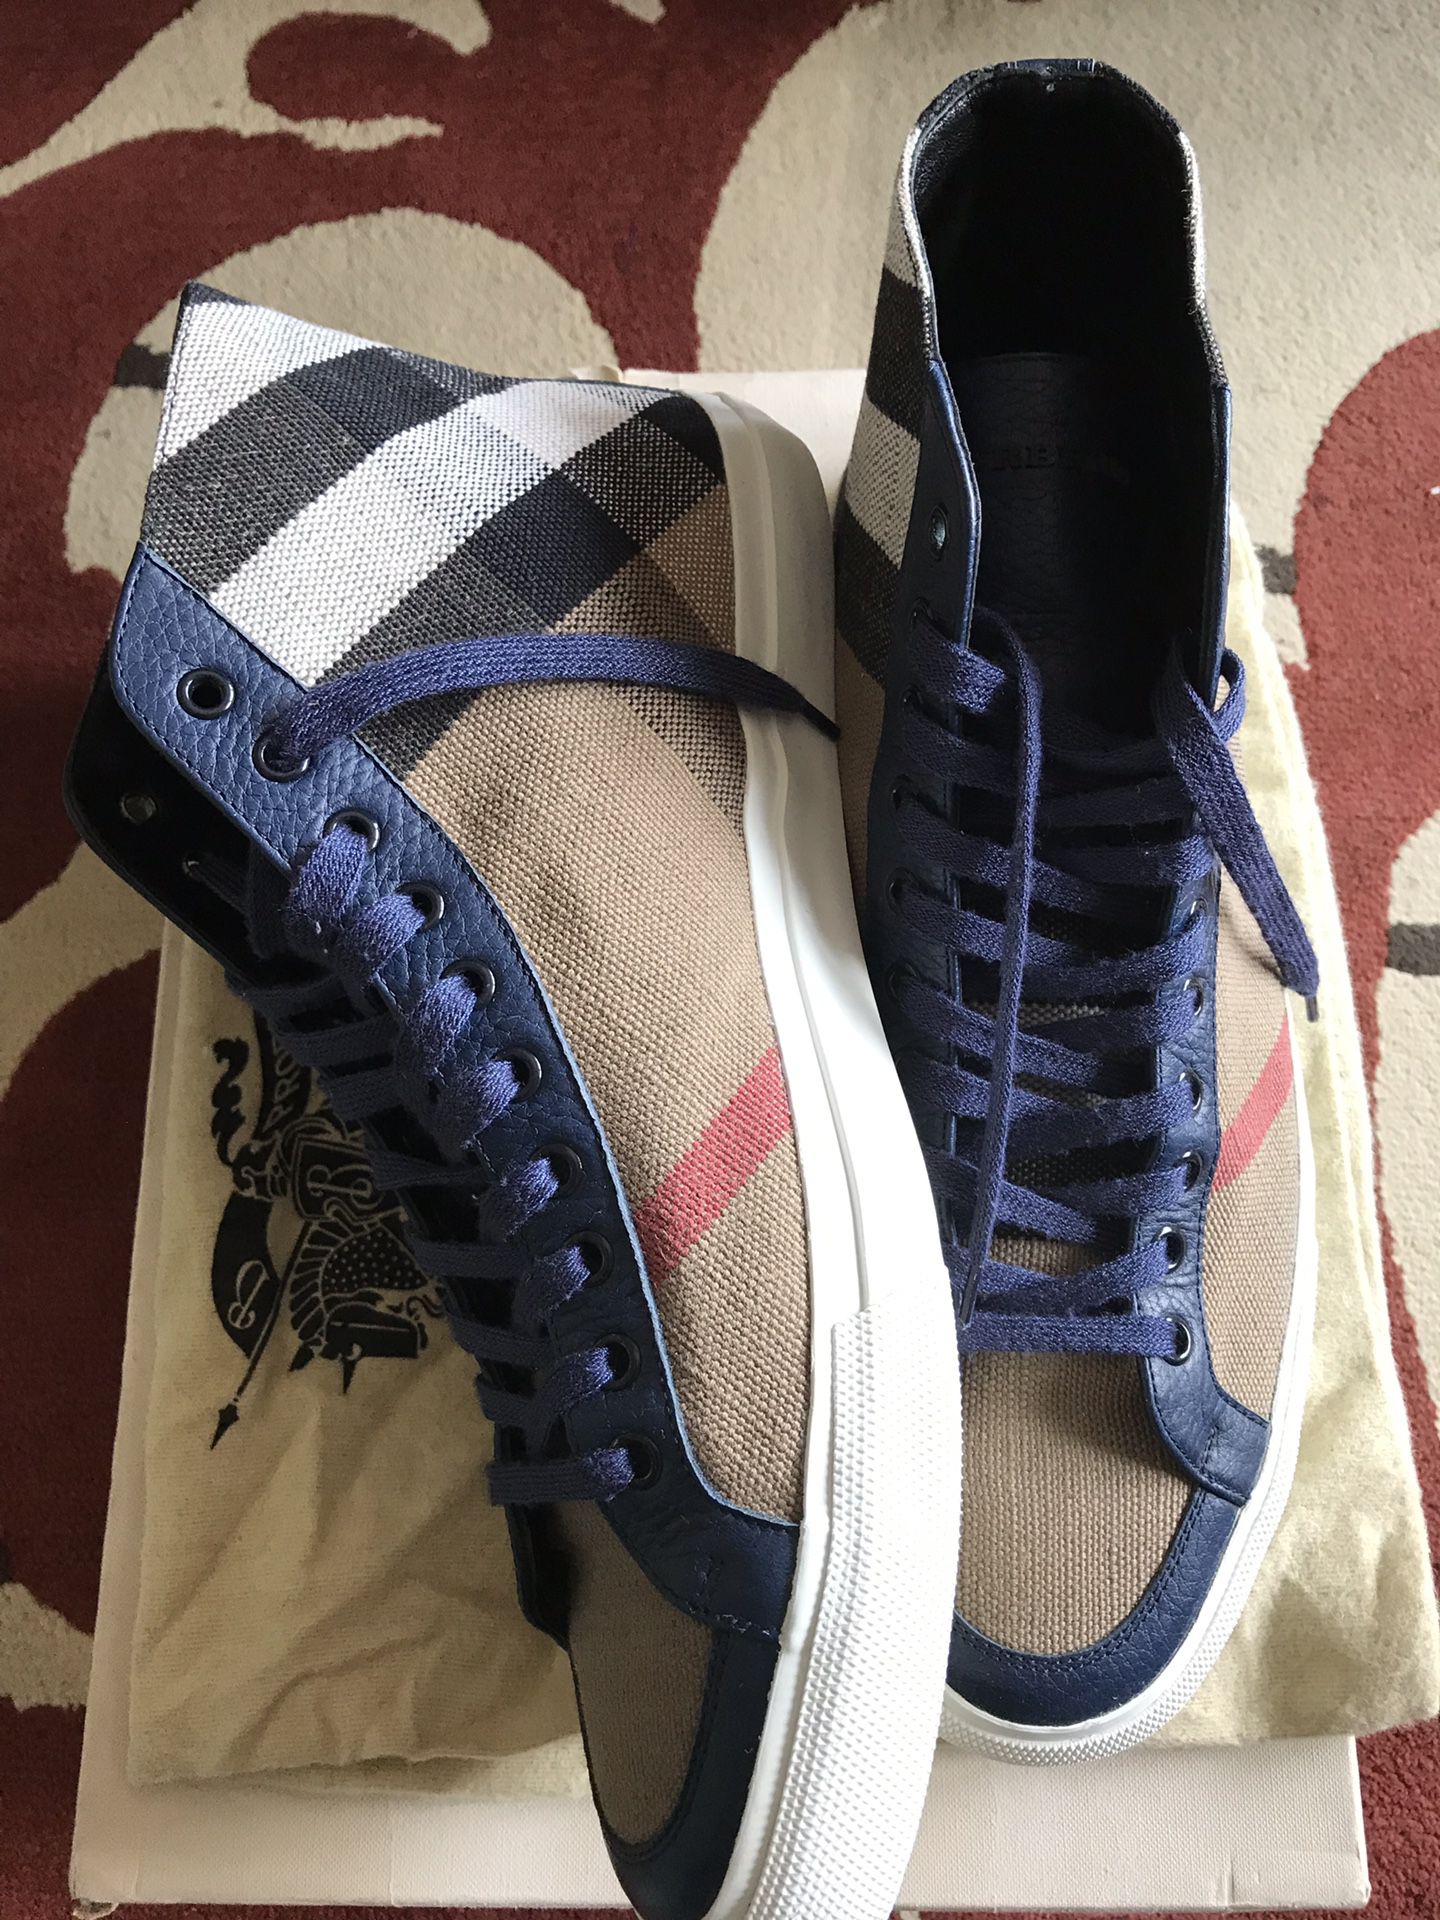 Authentic Burberry high top sneakers sz.11.5